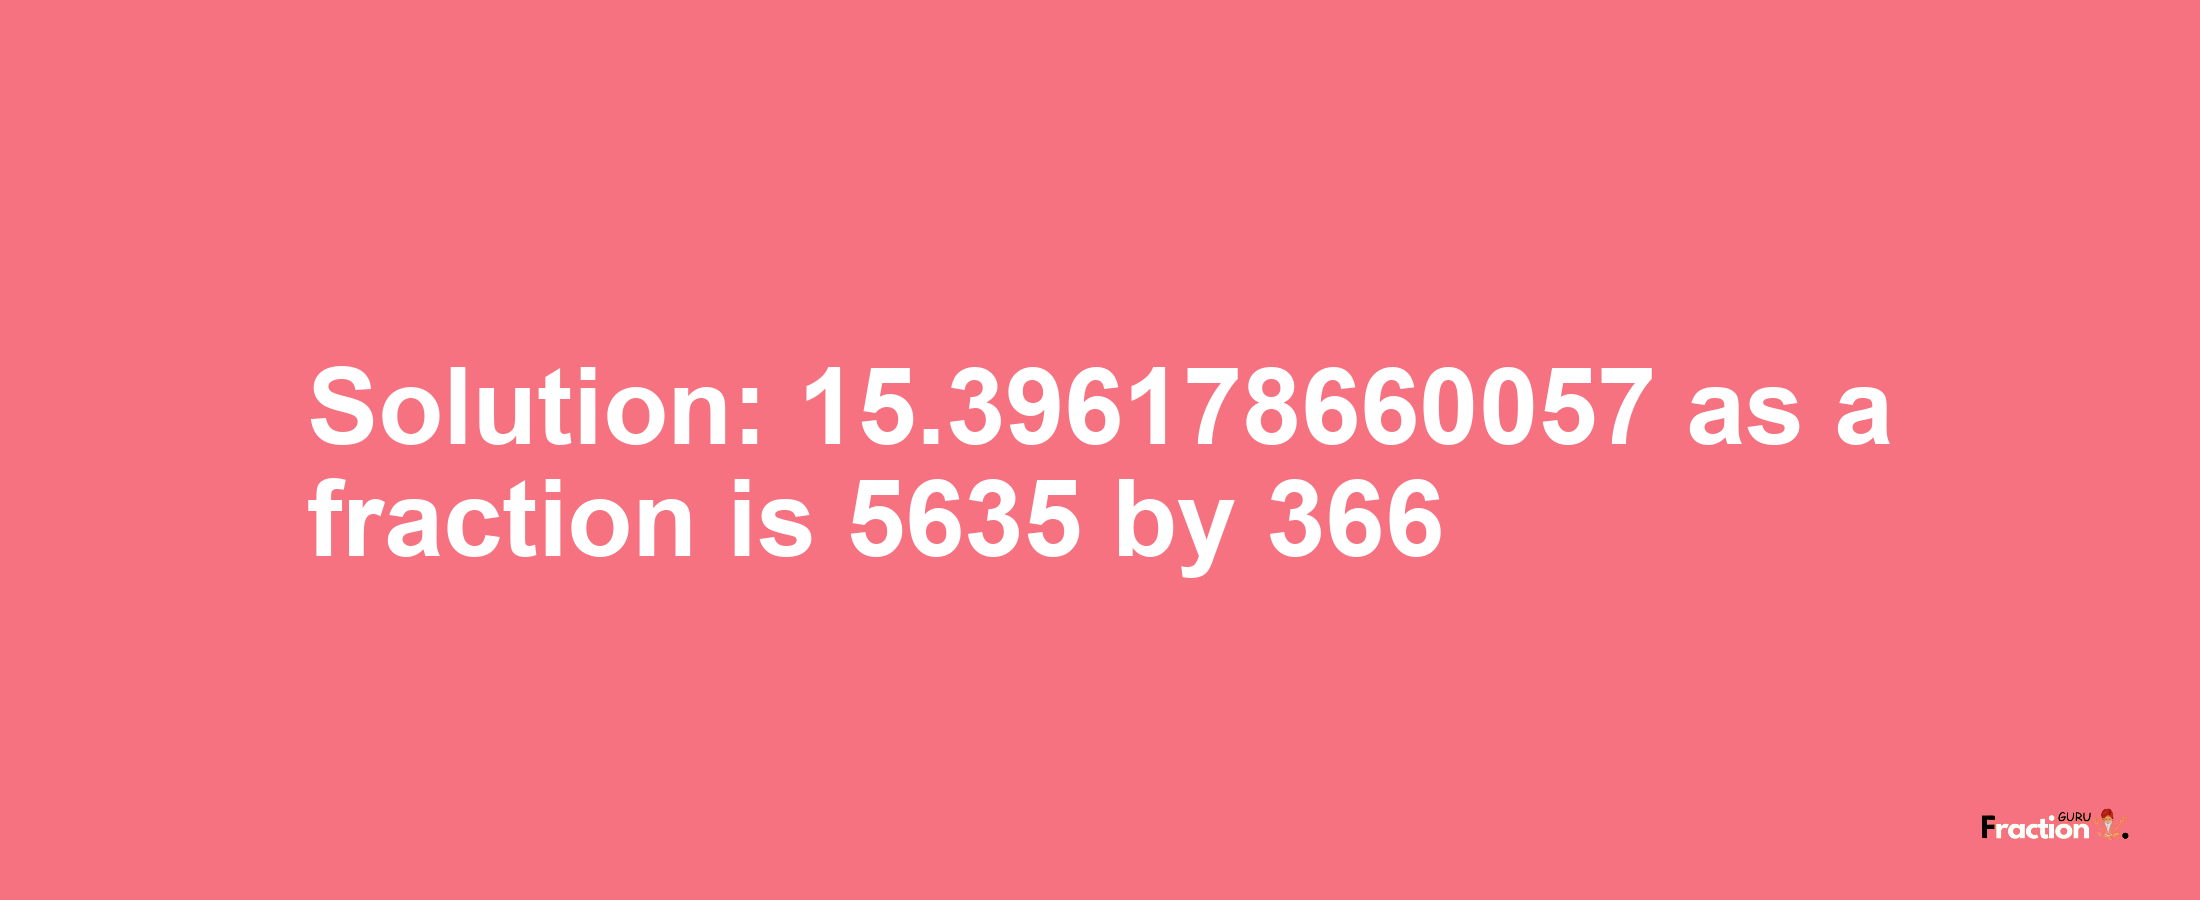 Solution:15.396178660057 as a fraction is 5635/366